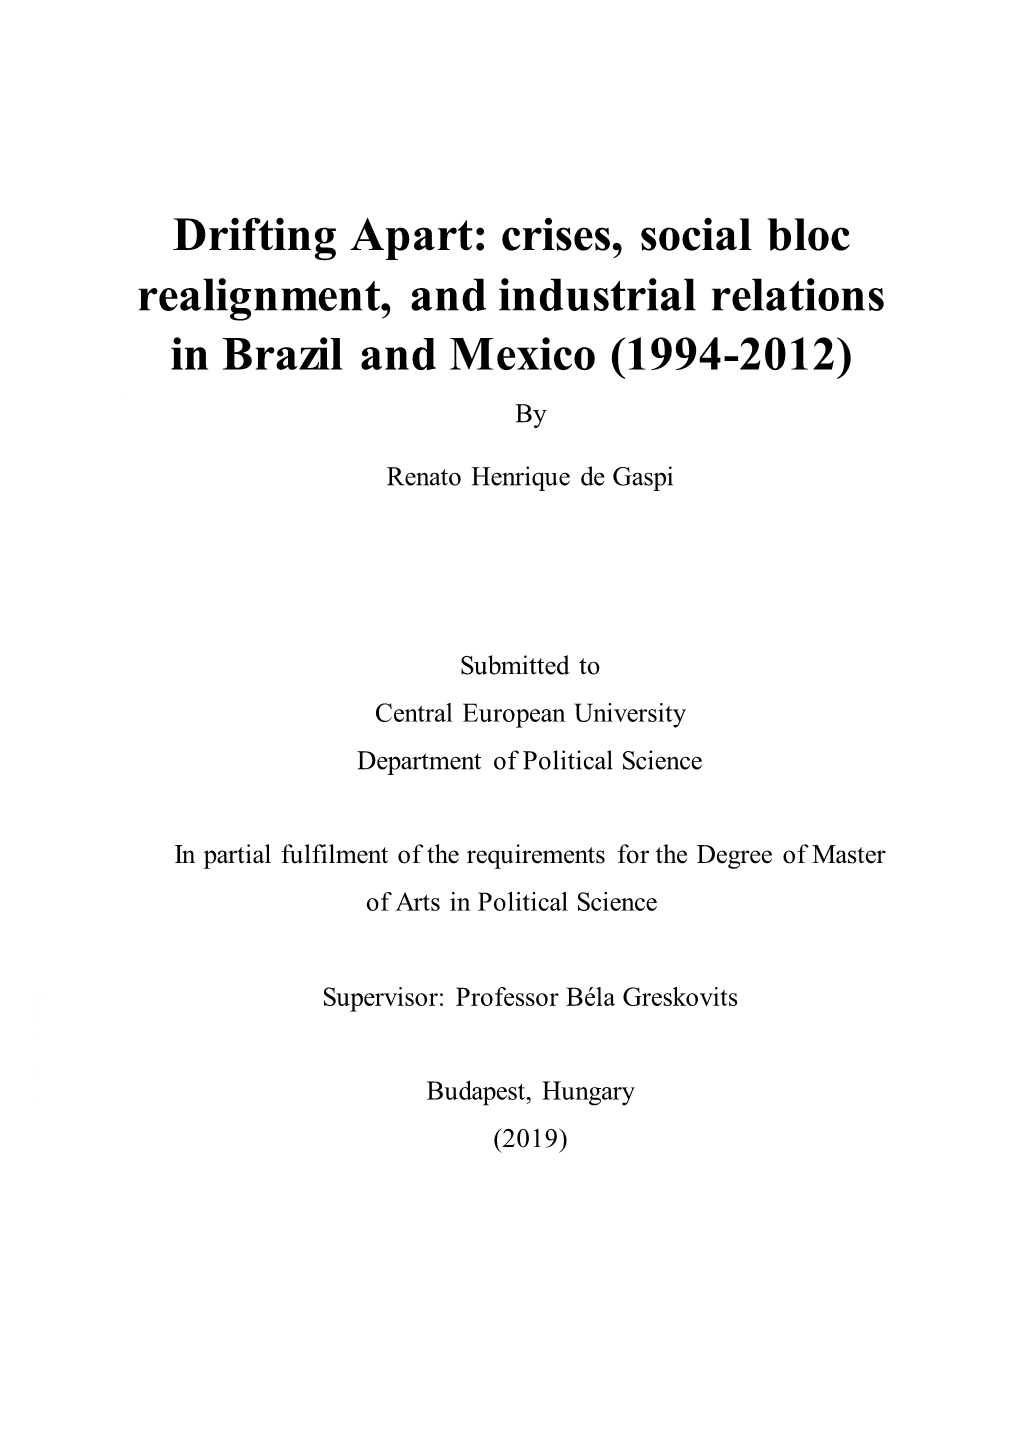 Crises, Social Bloc Realignment, and Industrial Relations in Brazil and Mexico (1994-2012) By